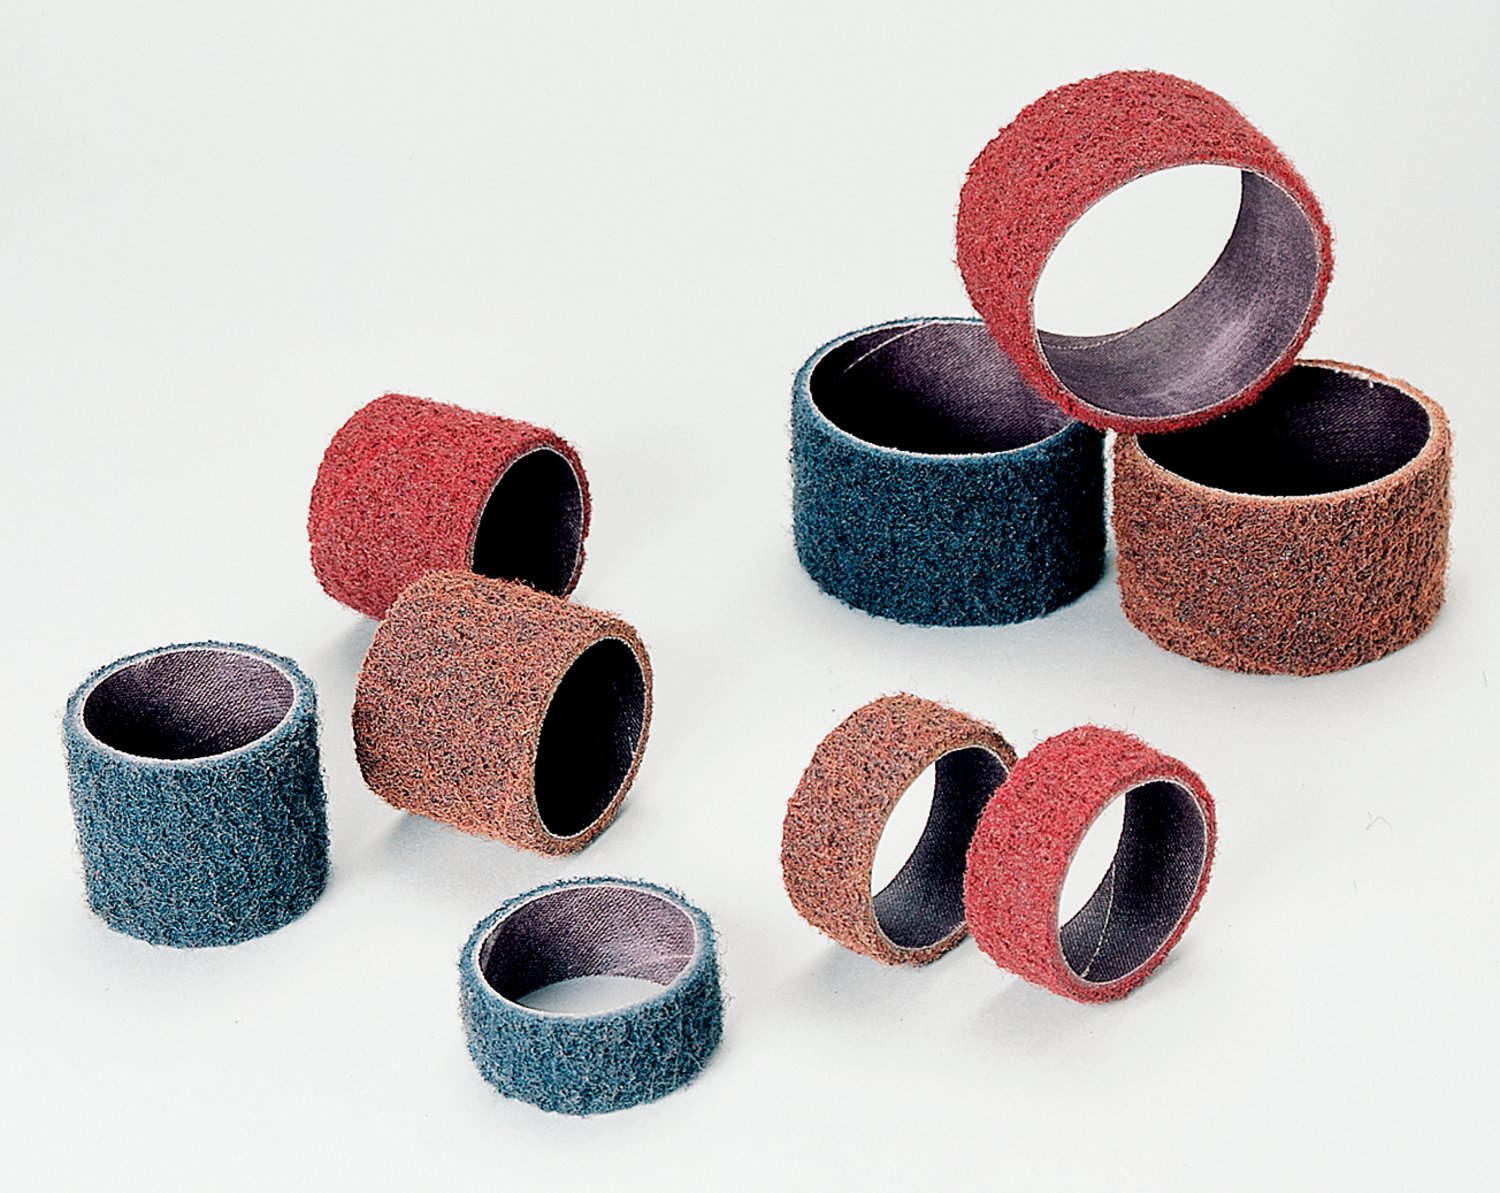 7010368752 - Standard Abrasives Surface Conditioning Band 727105, 3 in x 3 in MED,
10/Carton, 100 ea/Case